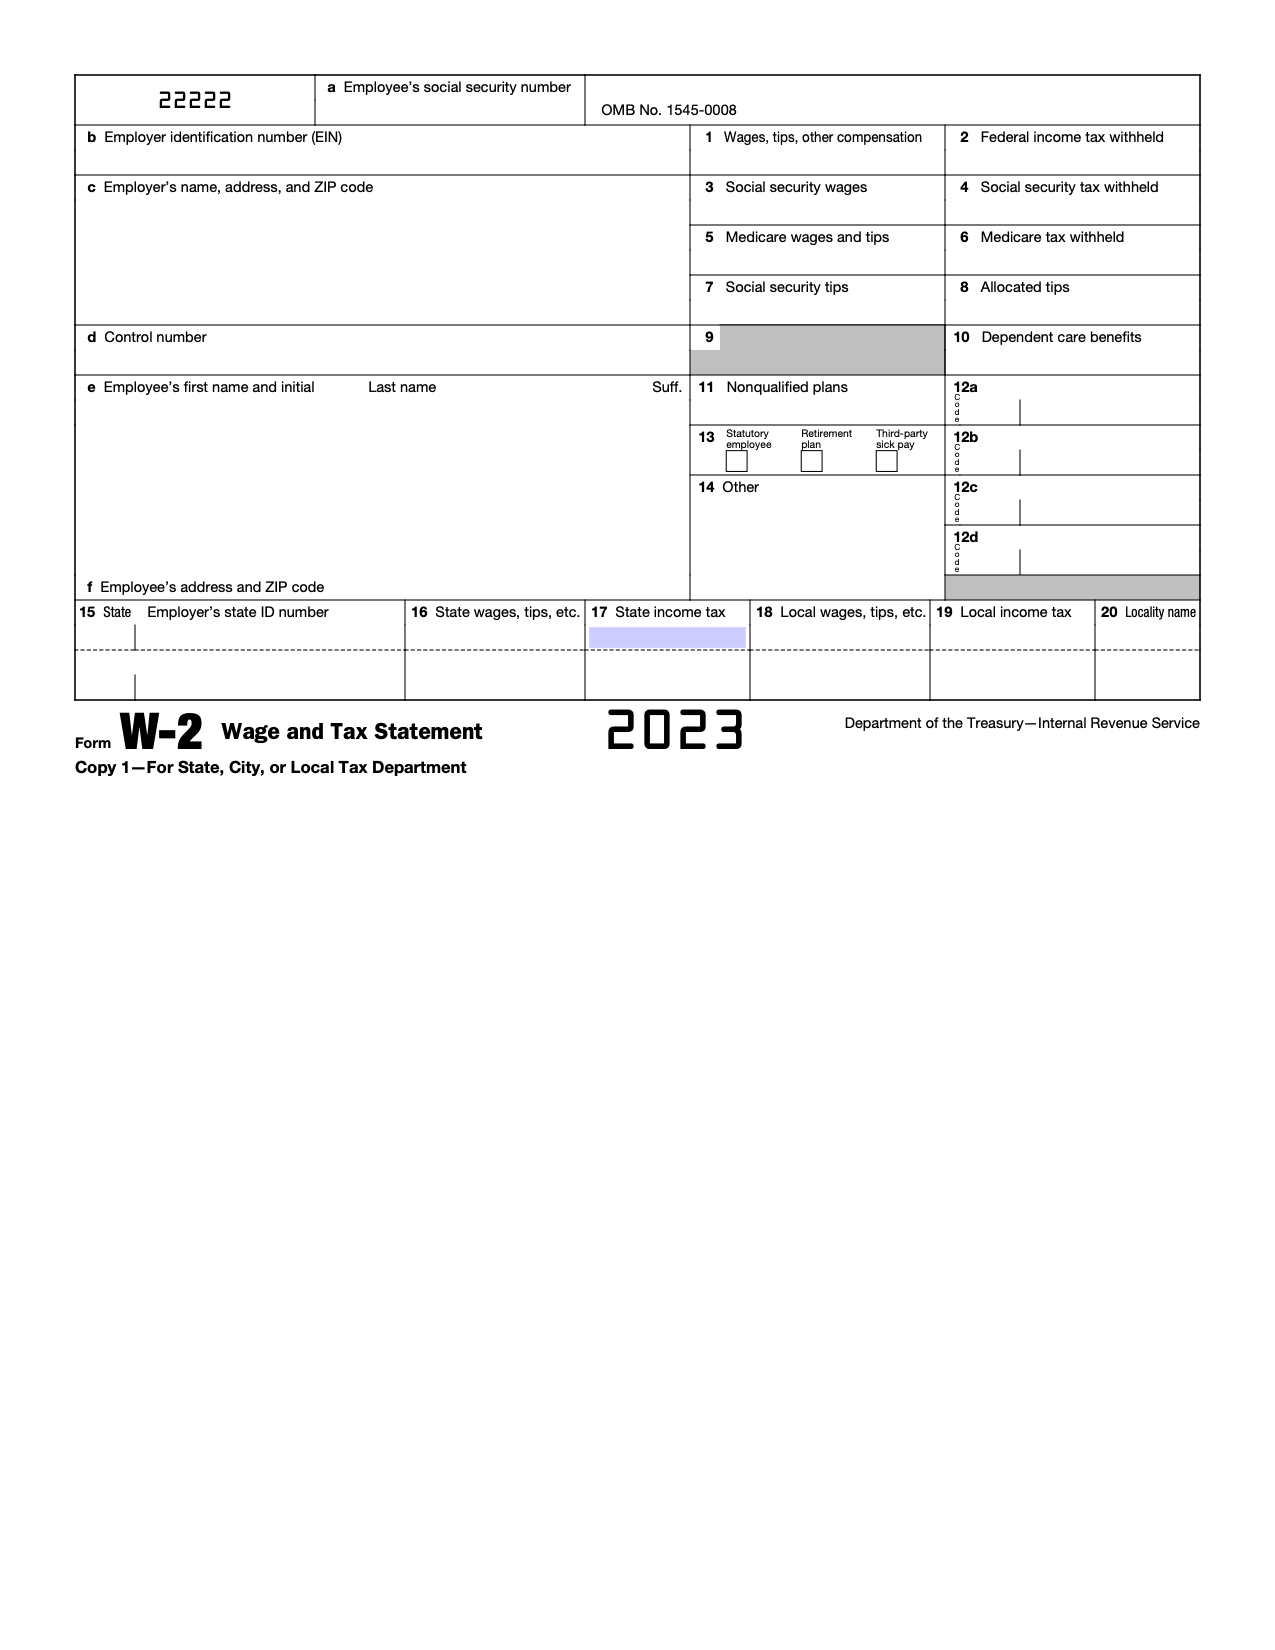 Free Irs Form W-2 | Wage And Tax Statement - Pdf – Eforms with W2 Form 2024 Printable